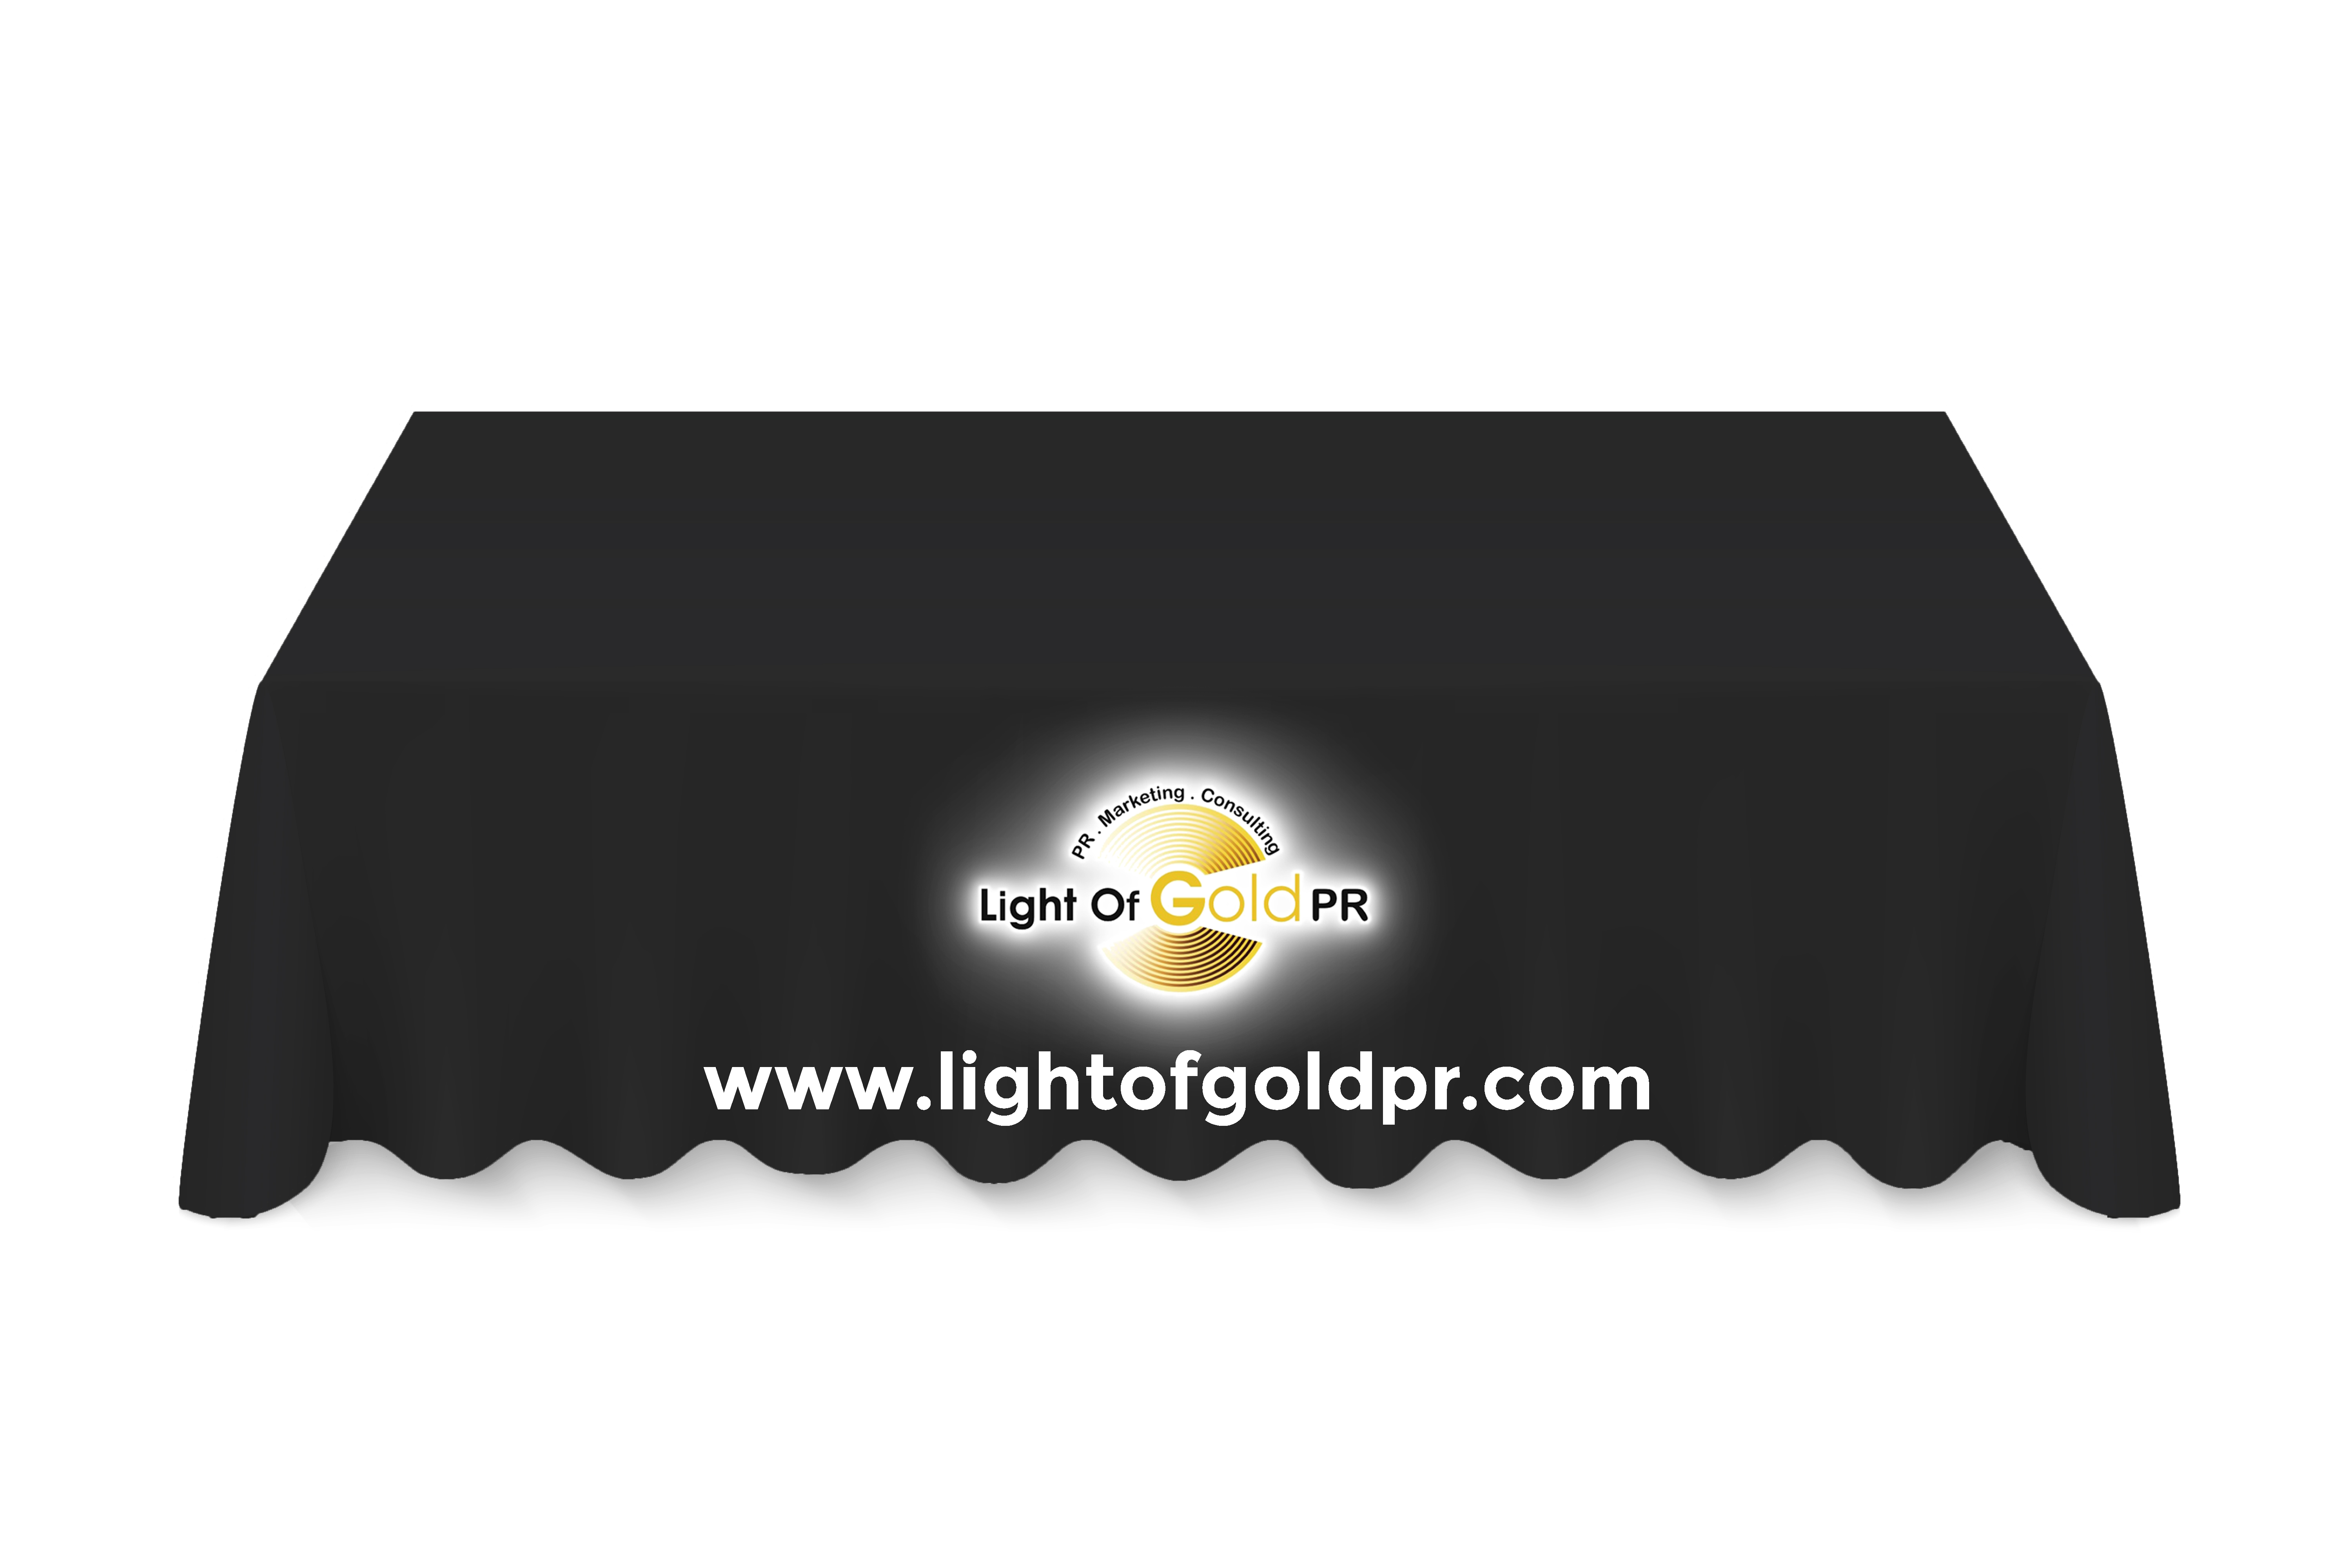 Light of Gold PR table clothe